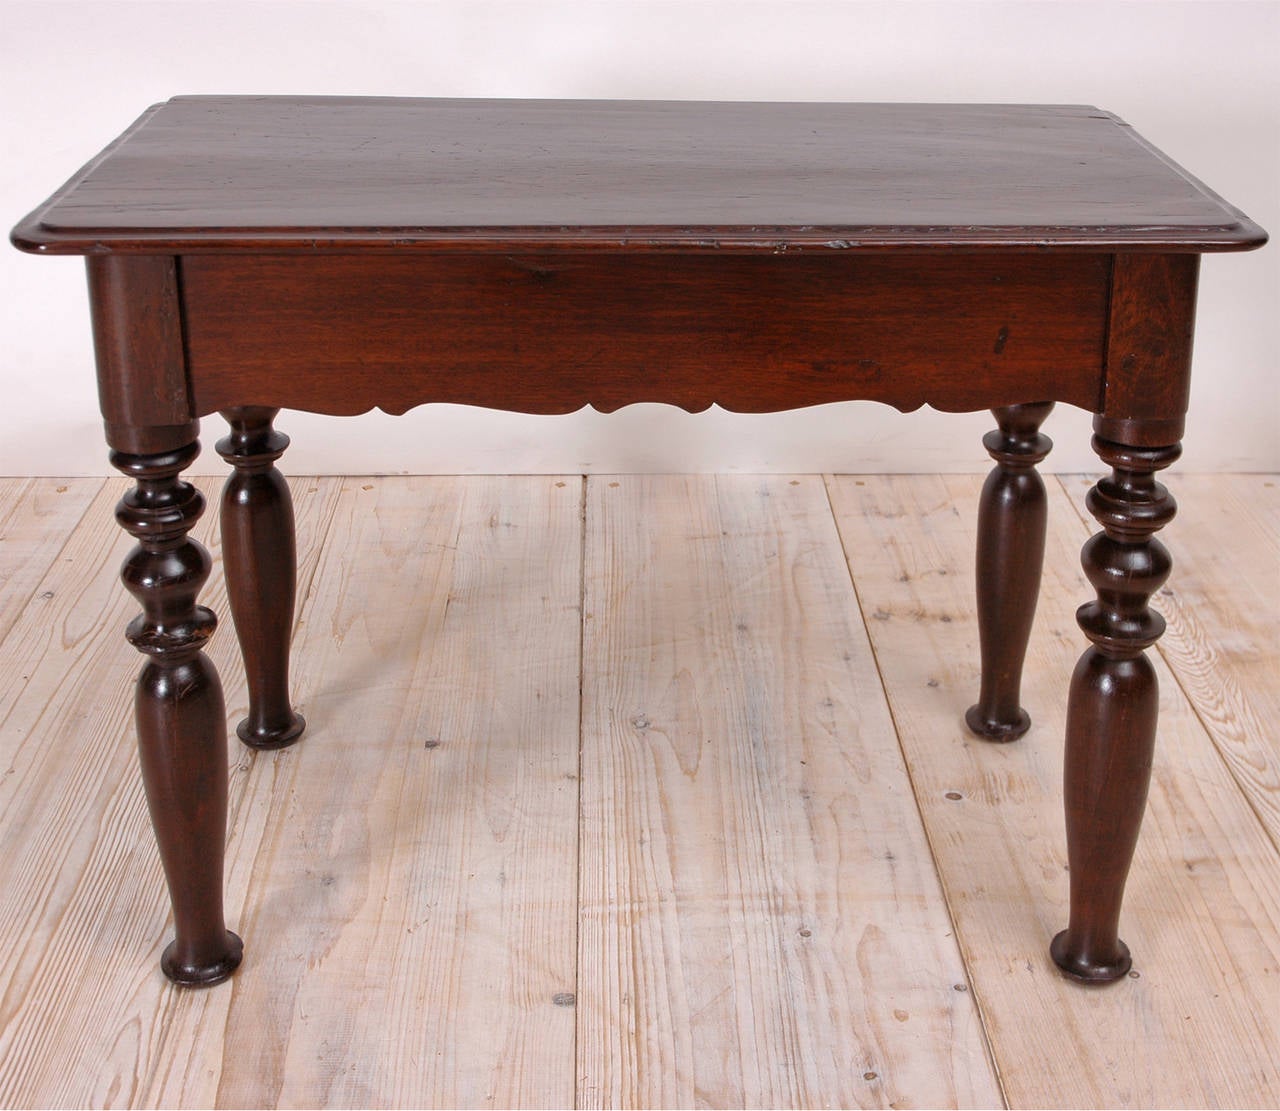 Dutch Colonial 19th Century Dutch Guiana Table in Mahogany with Turned Legs